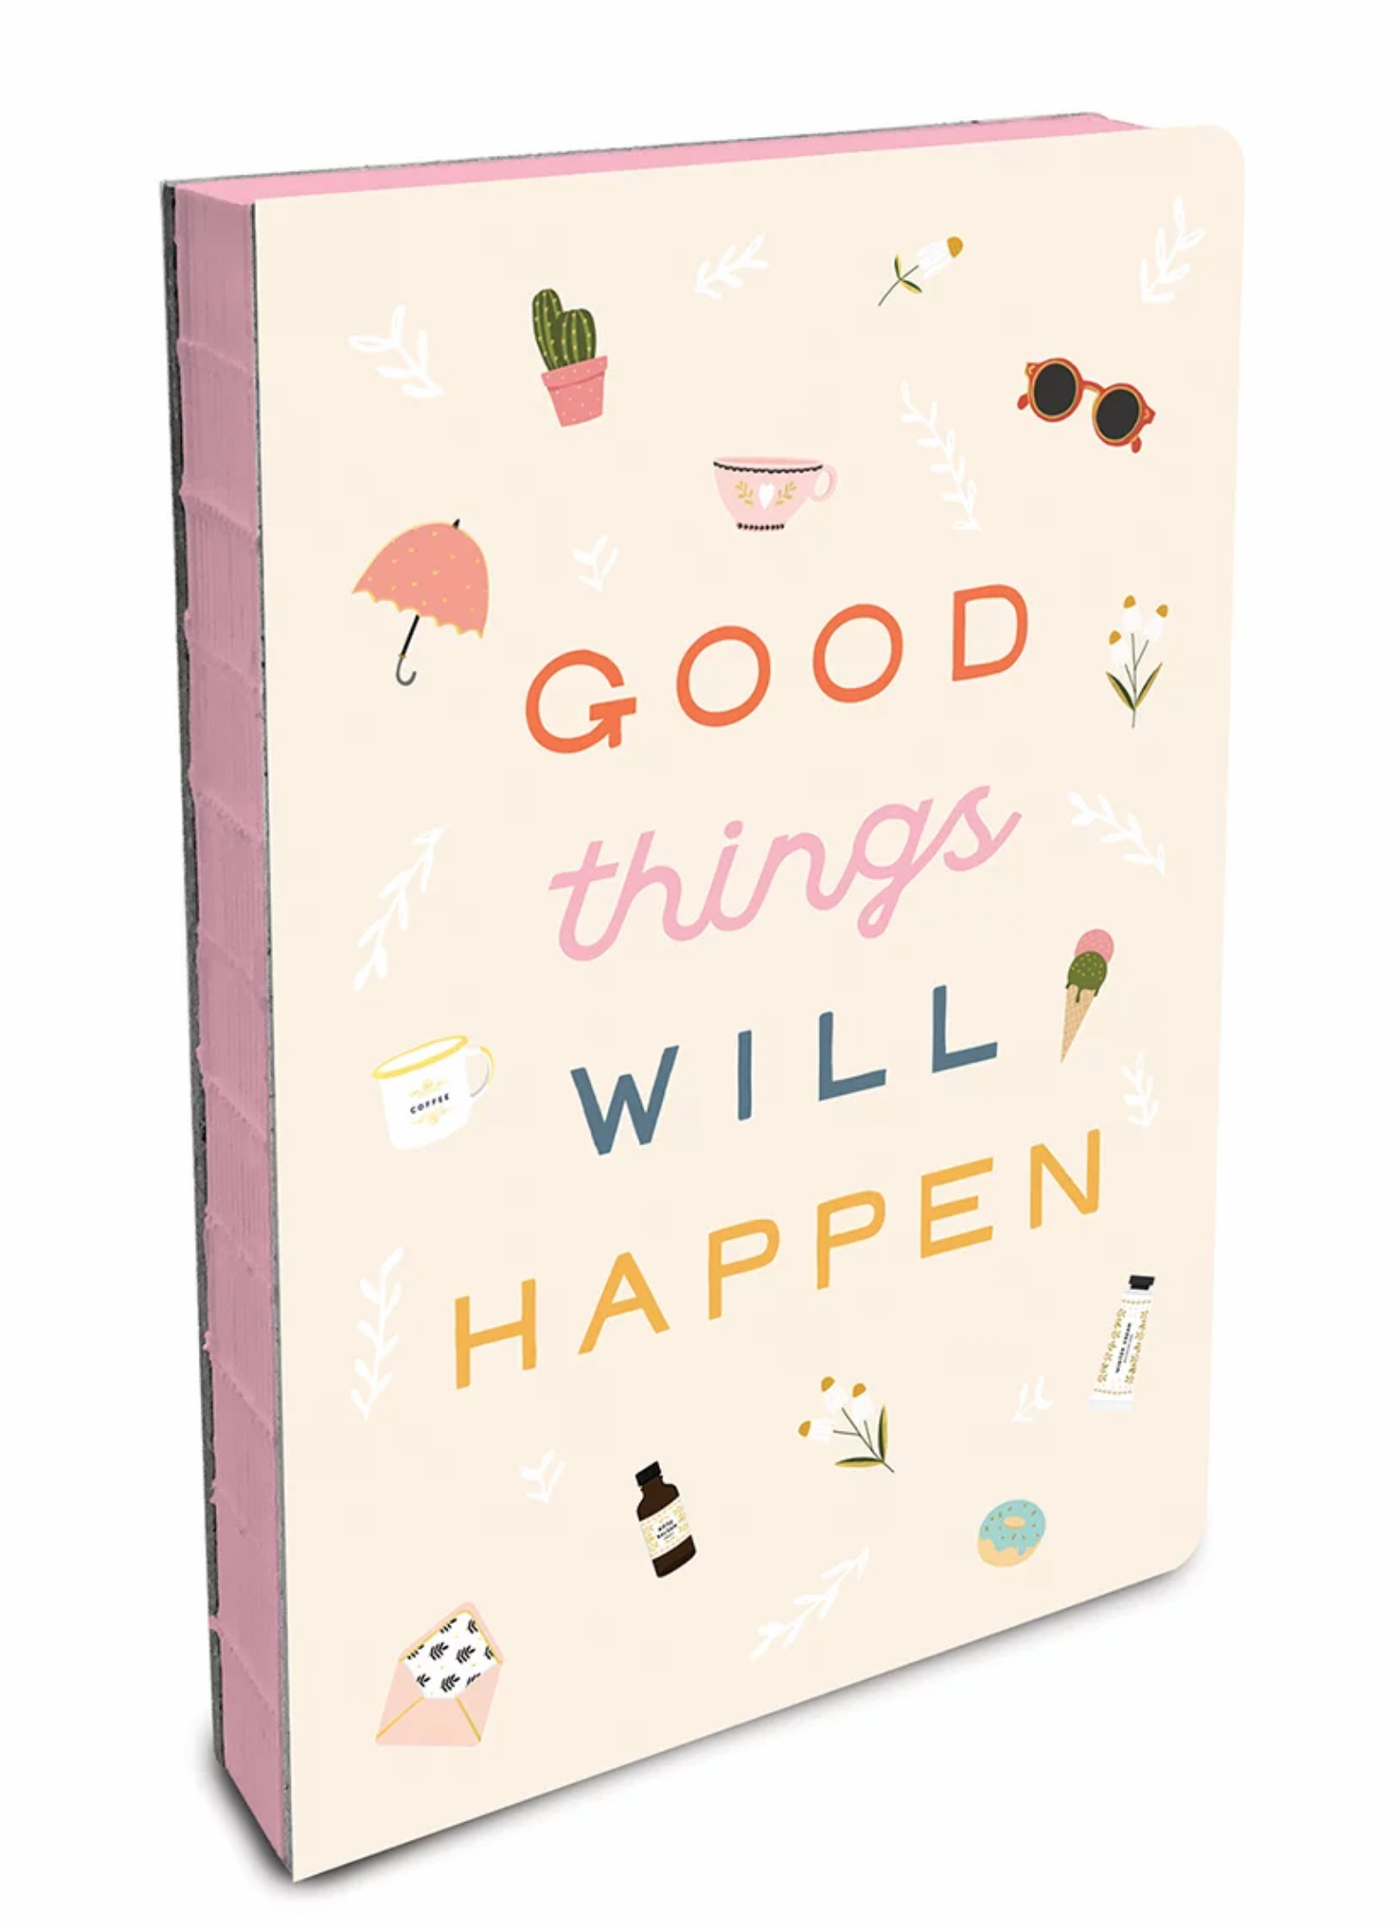 Coptic-Bound Journals Compact - Good Things Will Happen